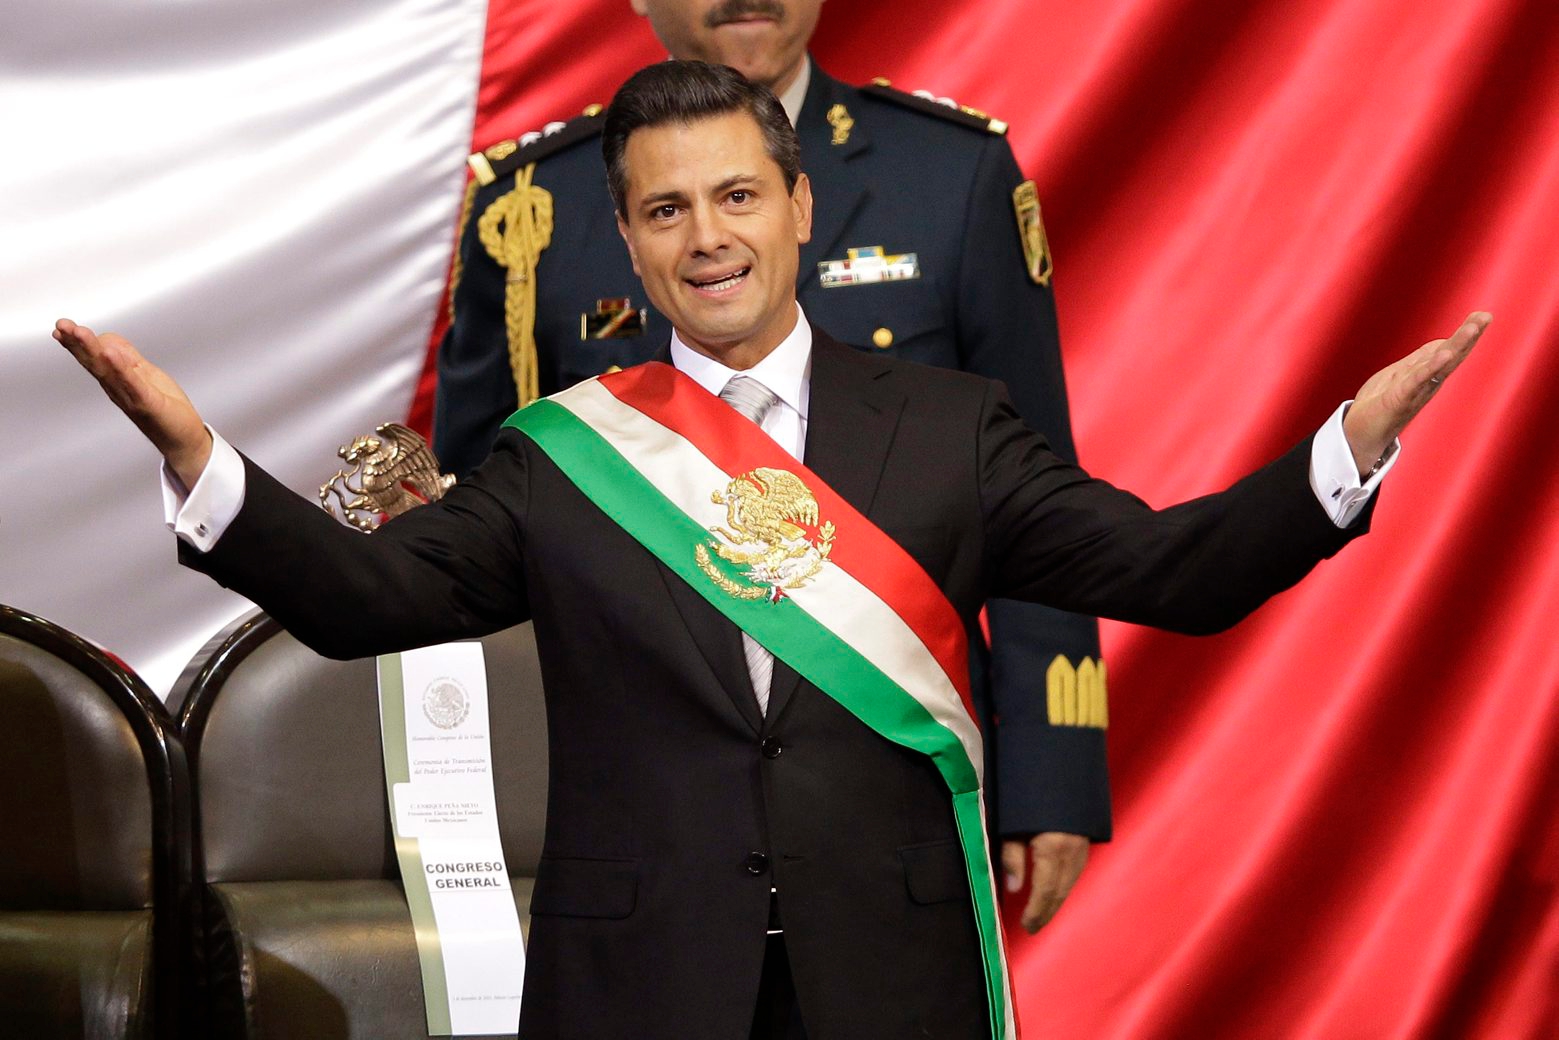 FILE - In this Dec. 1, 2012 file photo, Mexico's incoming President Enrique Pena Nieto of the Institutional Revolution Party, PRI, spreads out his arms after being sworn in at the inauguration ceremony in National Congress, in Mexico City. The PRI ruled Mexico for 71 years, despite accusations of stolen or bought elections, before being ousted in 2000 voting. When it returned to power in 2012 under President Pena Nieto, its leaders couldn't stop talking about how their party had changed. (AP Photo/Alexandre Meneghini, File) Mexico Embattled Ruling Party